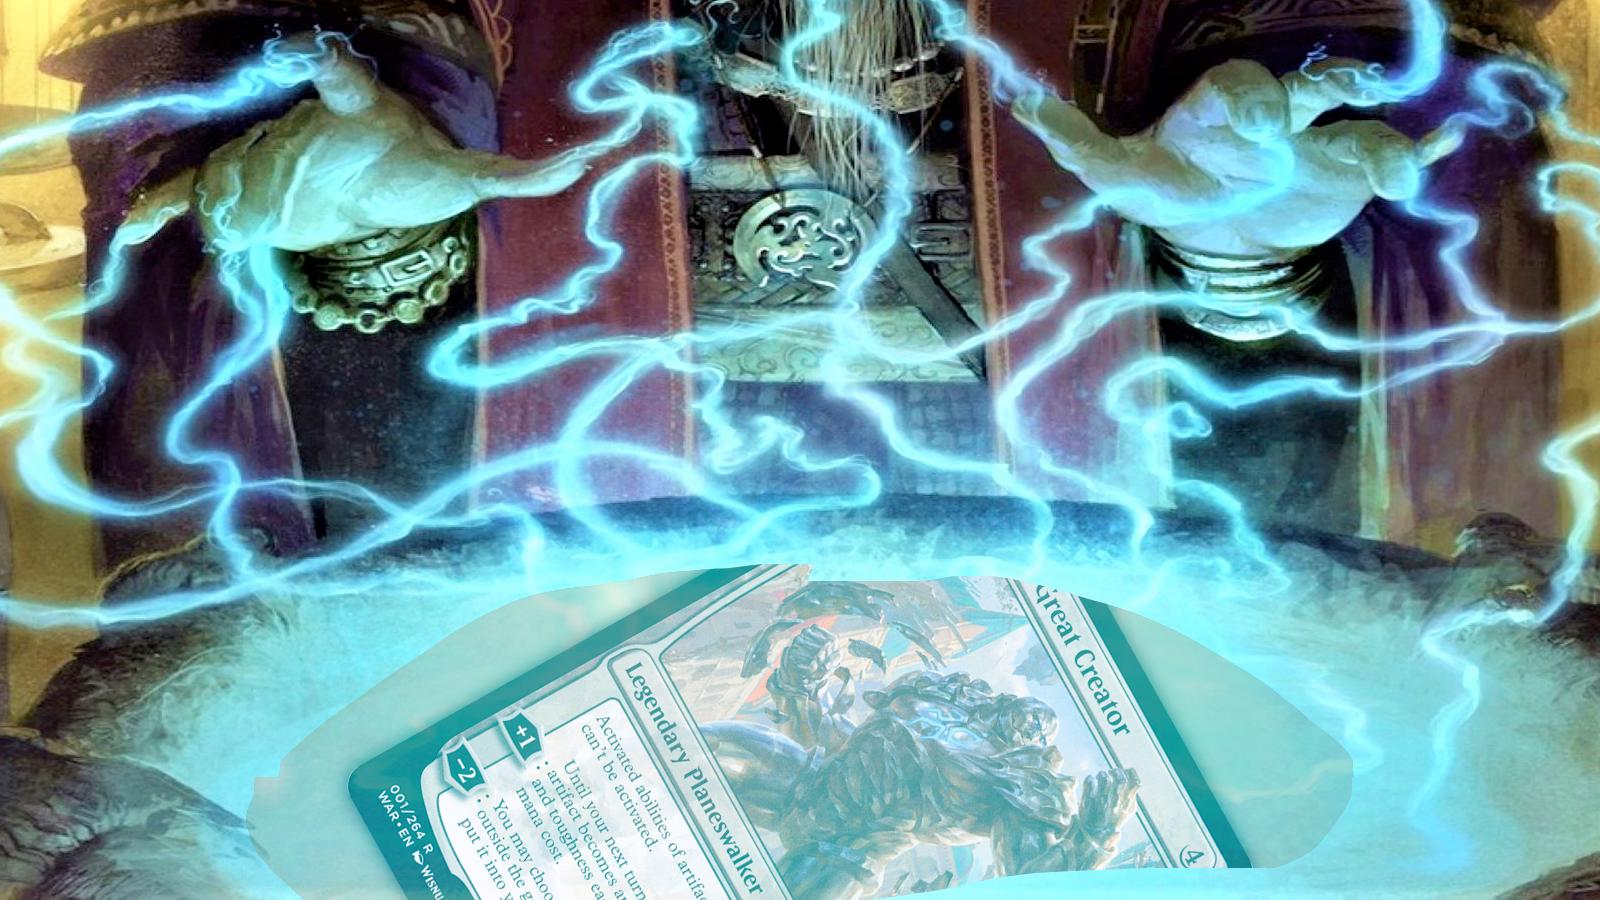 mtg bans, preordain art with karn underneath the glowing ooze featured in the art